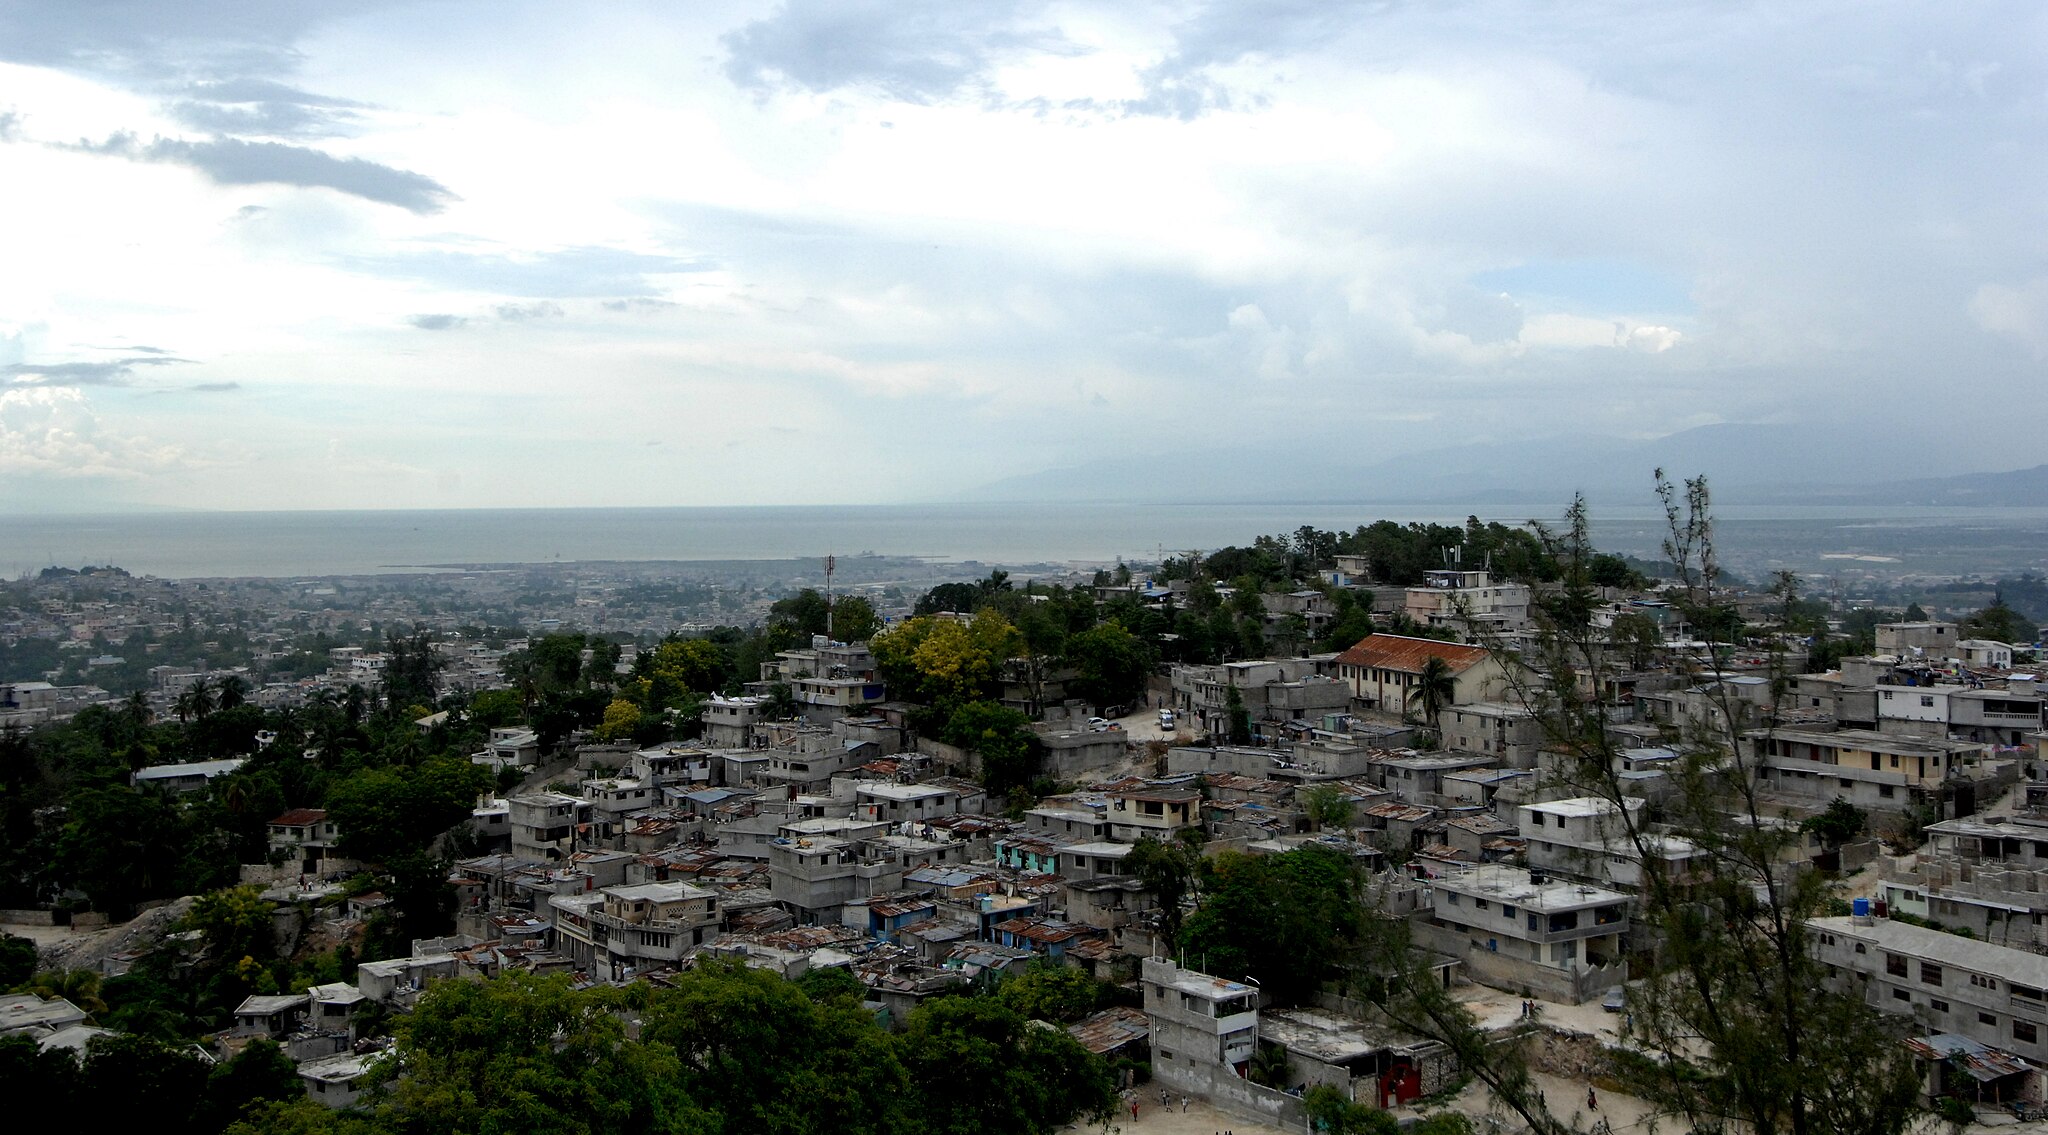 Haiti human rights NGO suspends operations due to increase in threats